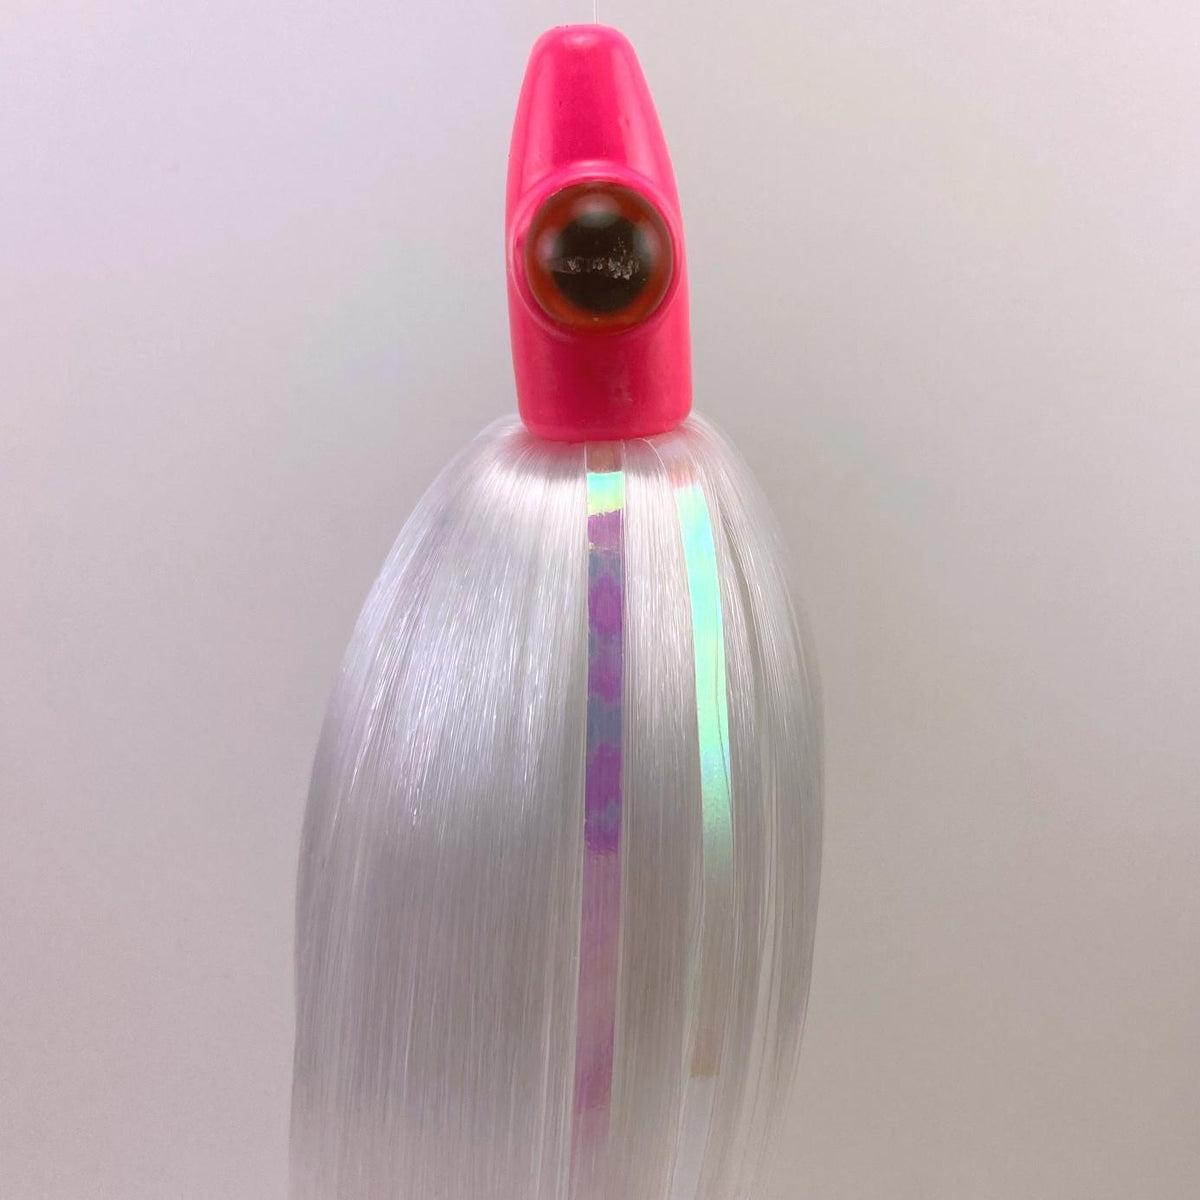 MagicTail Hoo Magic Trolling Lures 1oz / Pink Crystal